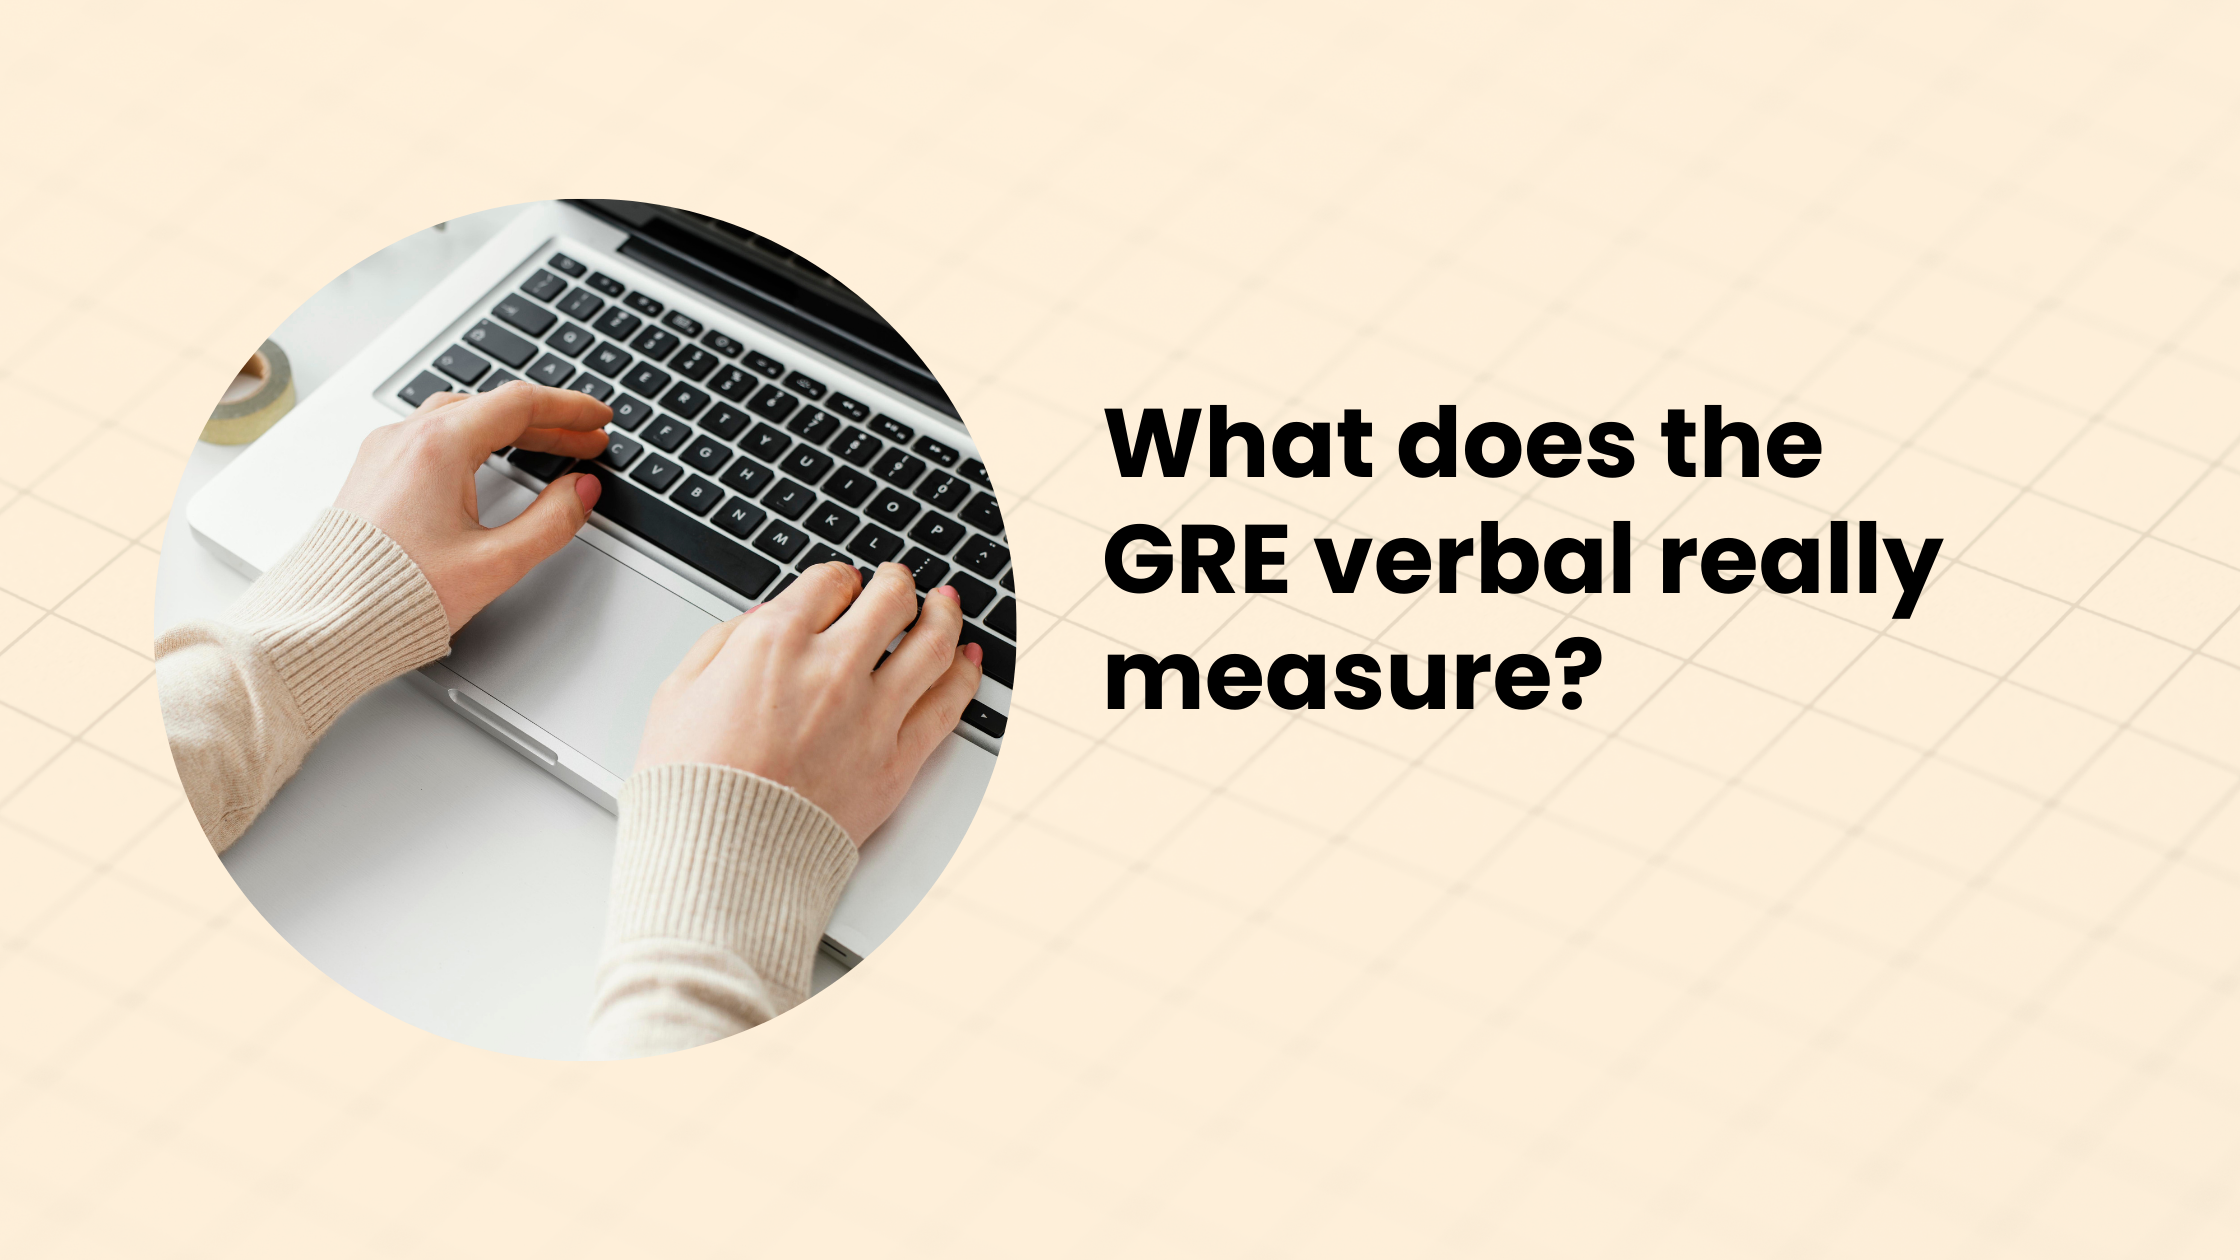 What does the GRE verbal measures?